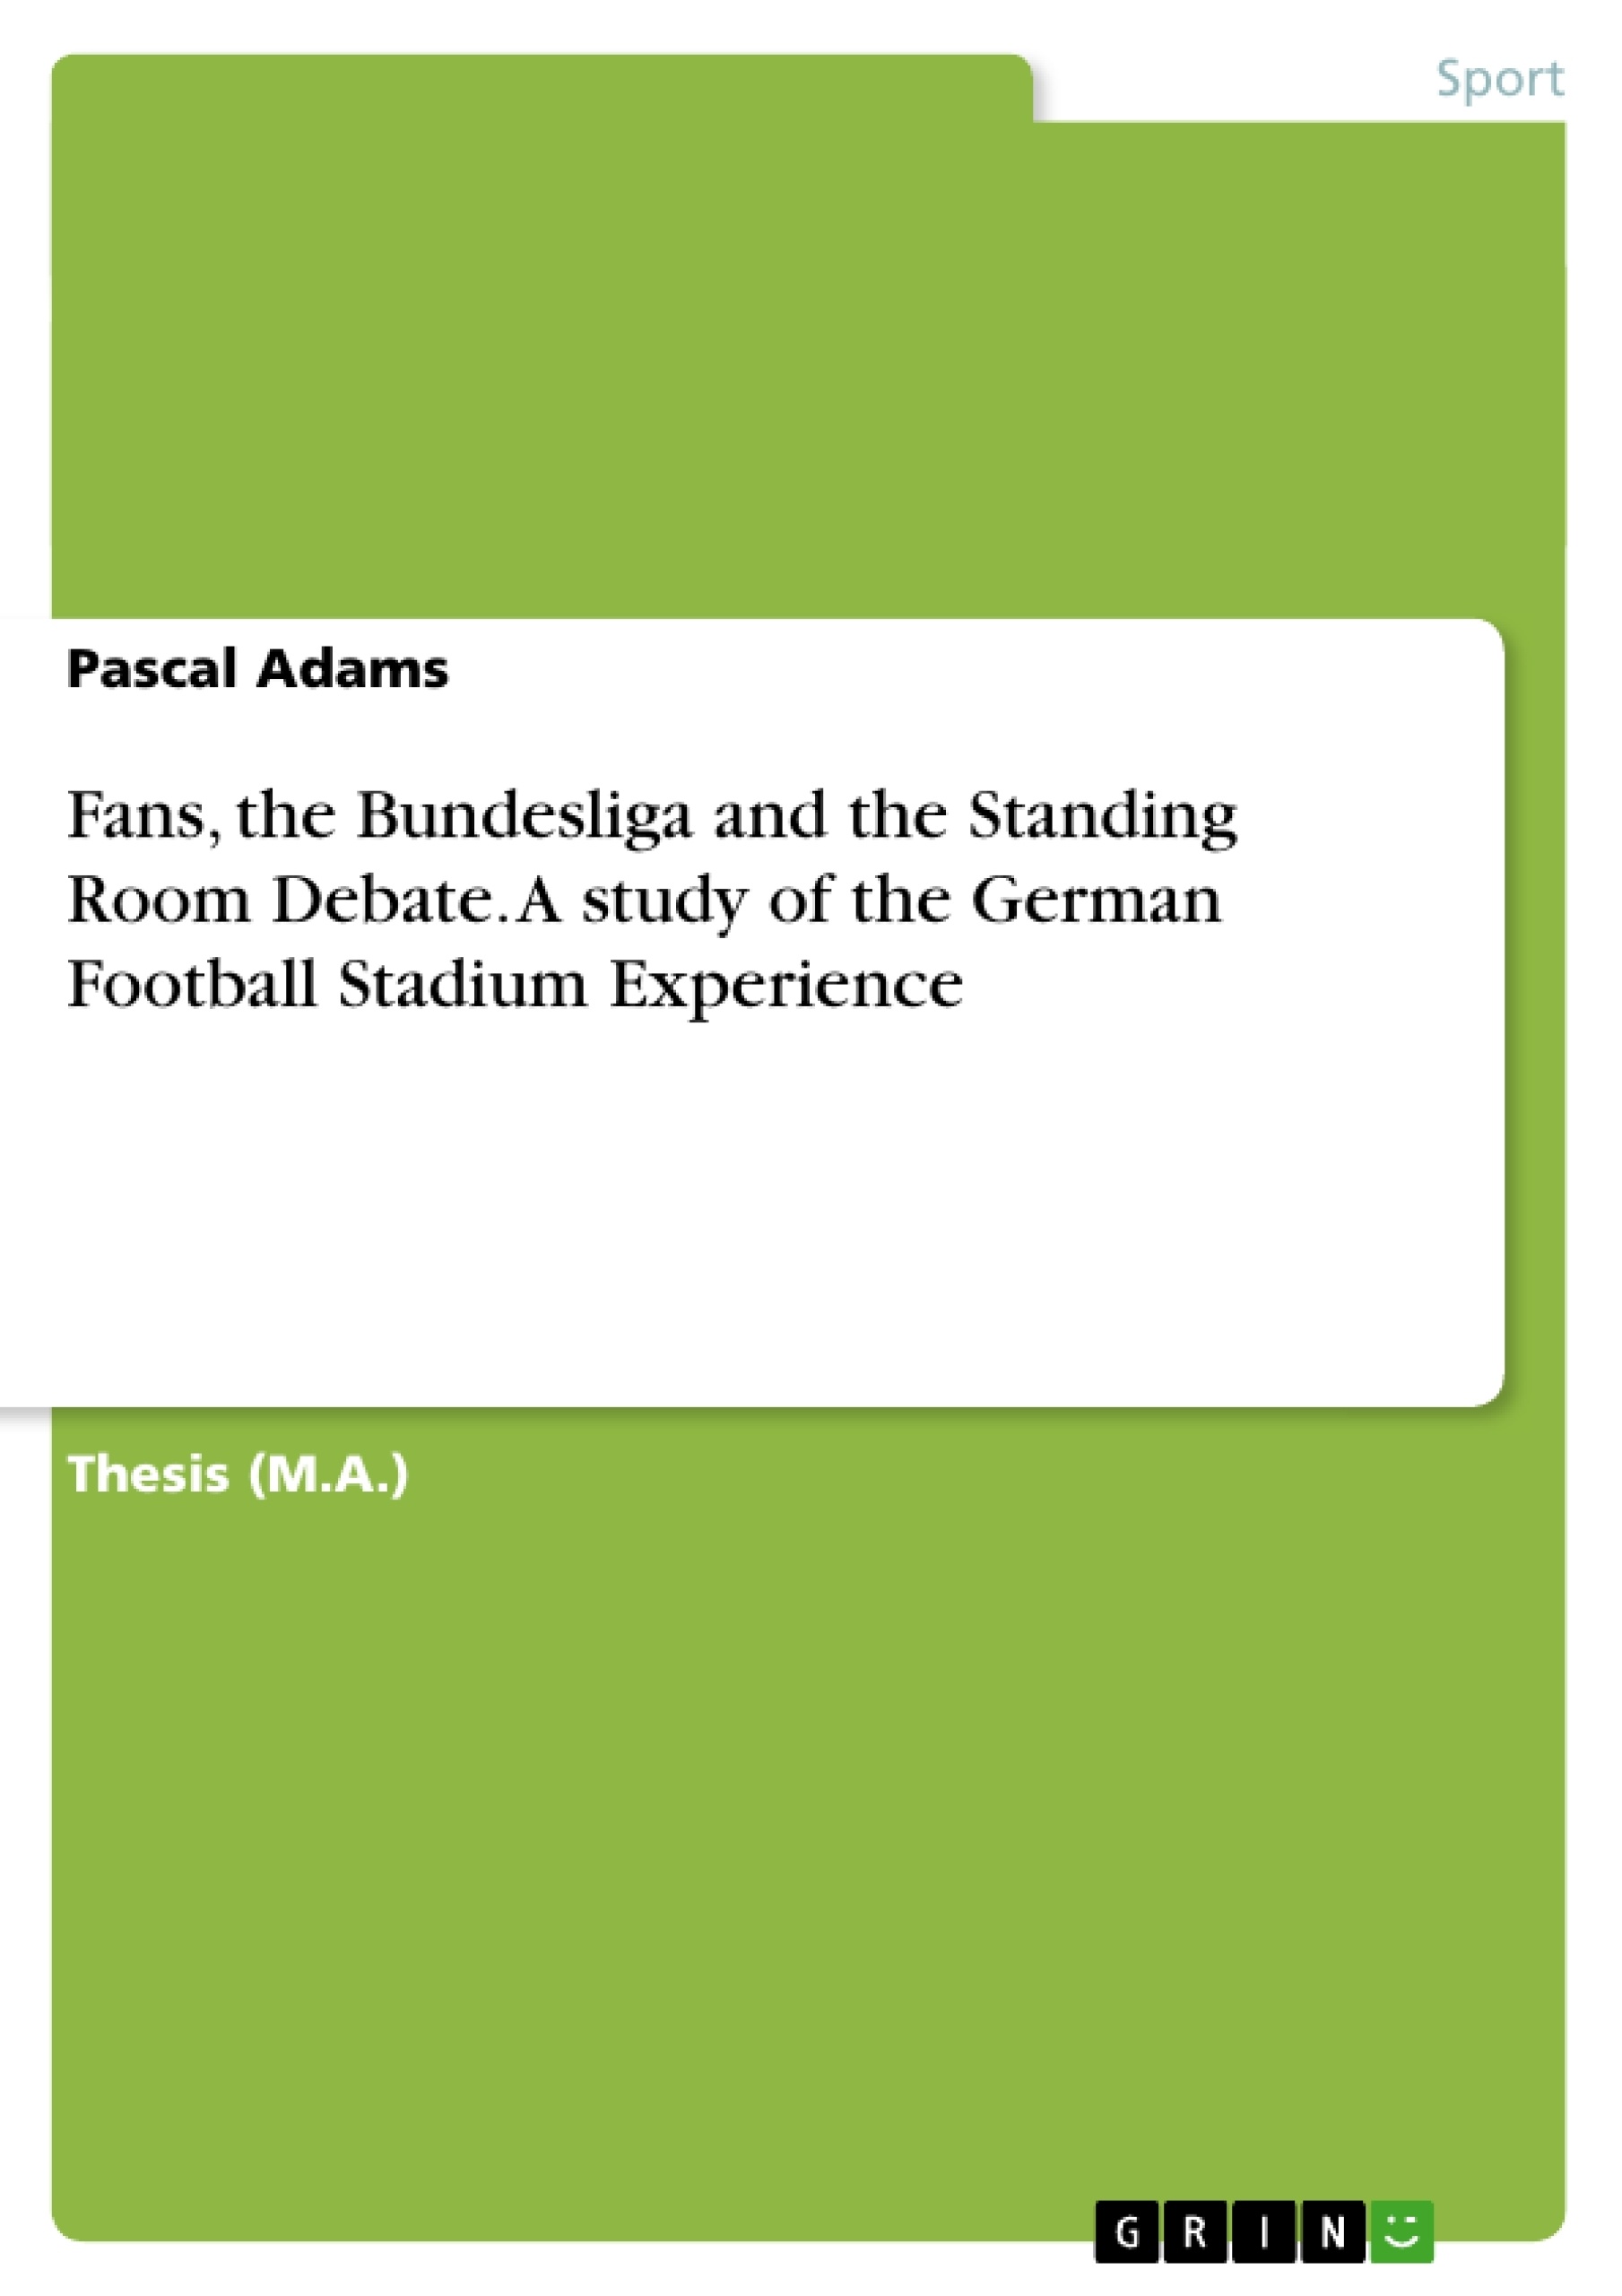 Title: Fans, the Bundesliga and the Standing Room Debate. A study of the German Football Stadium Experience